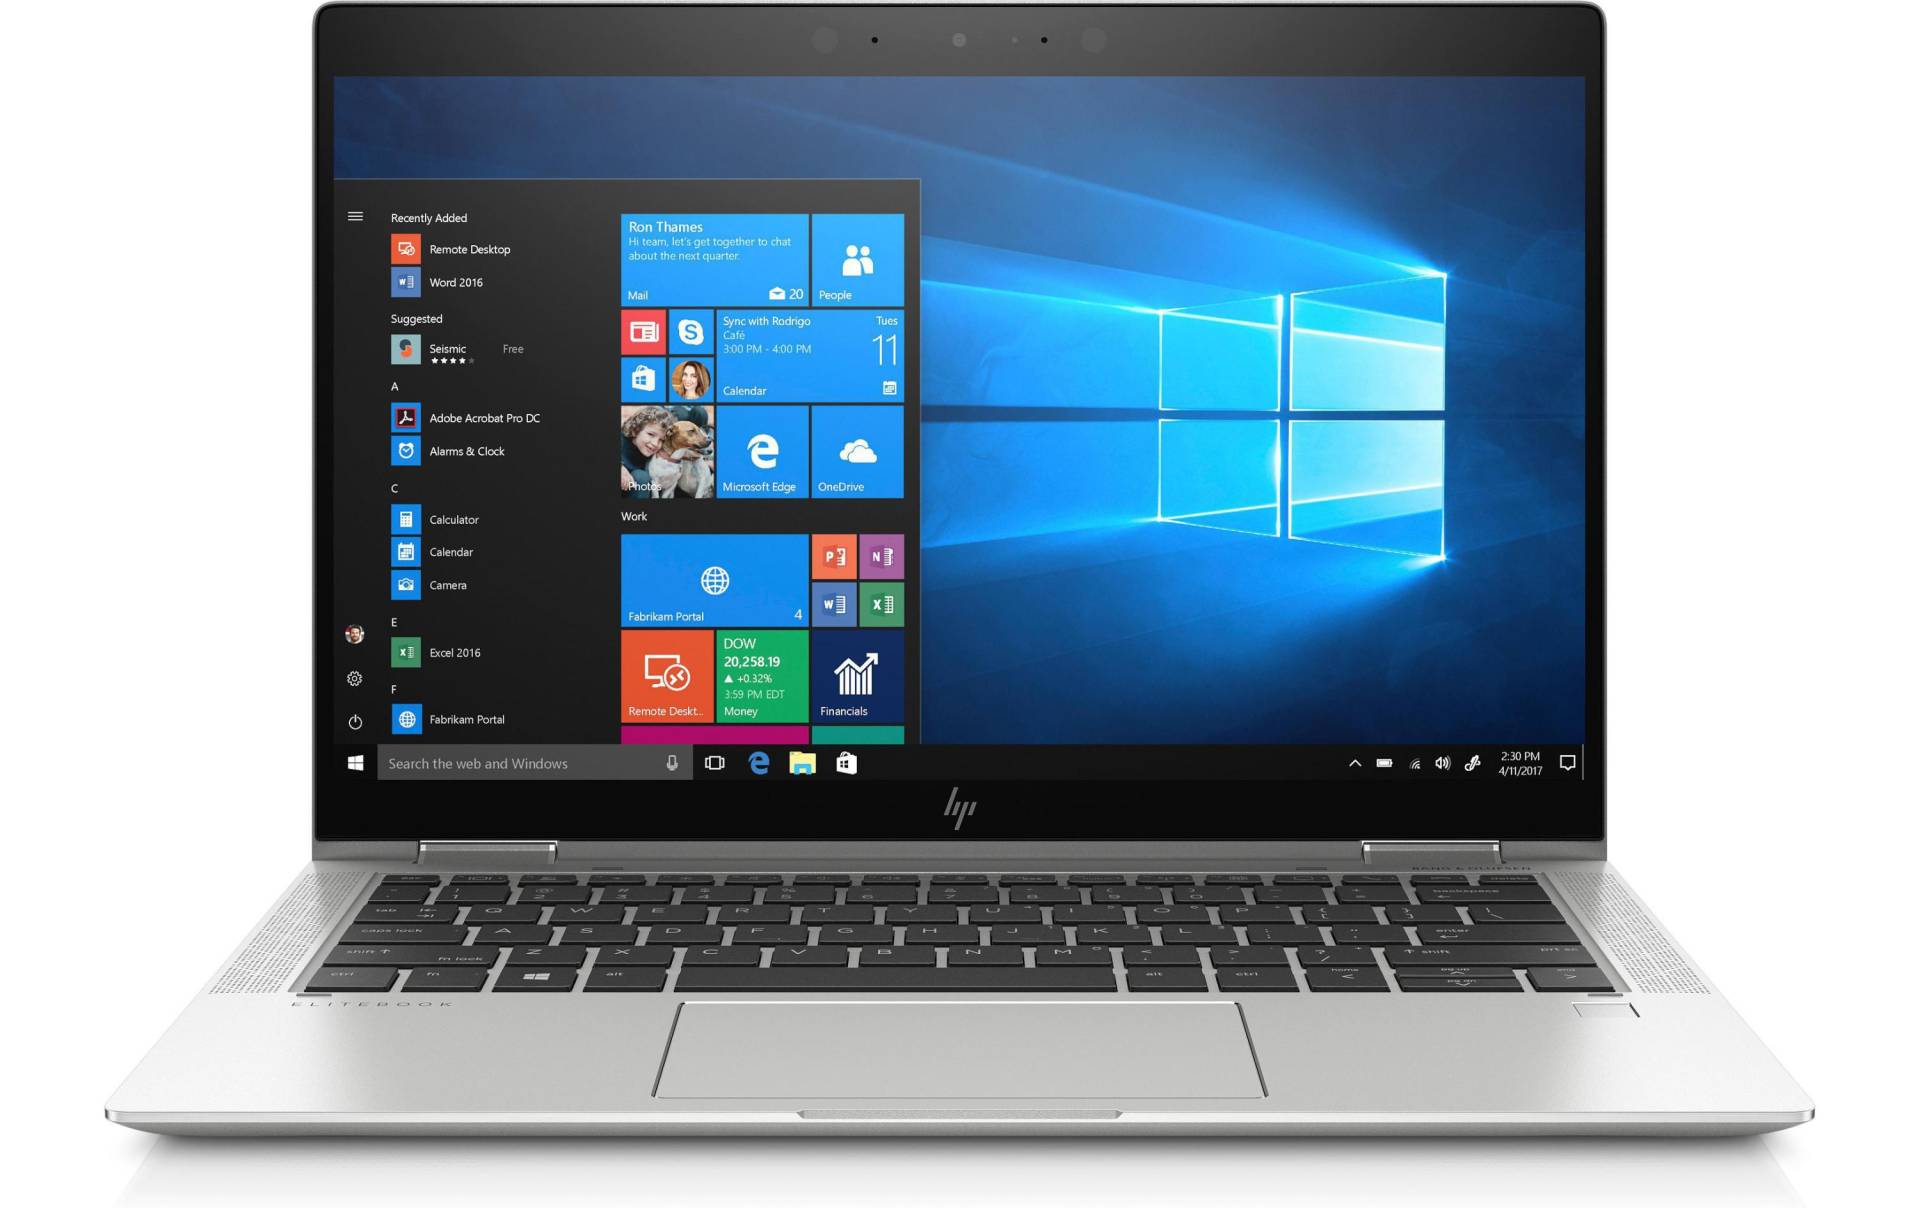 HP Business-Notebook »x360 1030 G4 9FT65EA«, 33,78 cm, / 13,3 Zoll, Intel, Core i5, UHD Graphics 620, 16 GB HDD, 512 GB SSD von HP